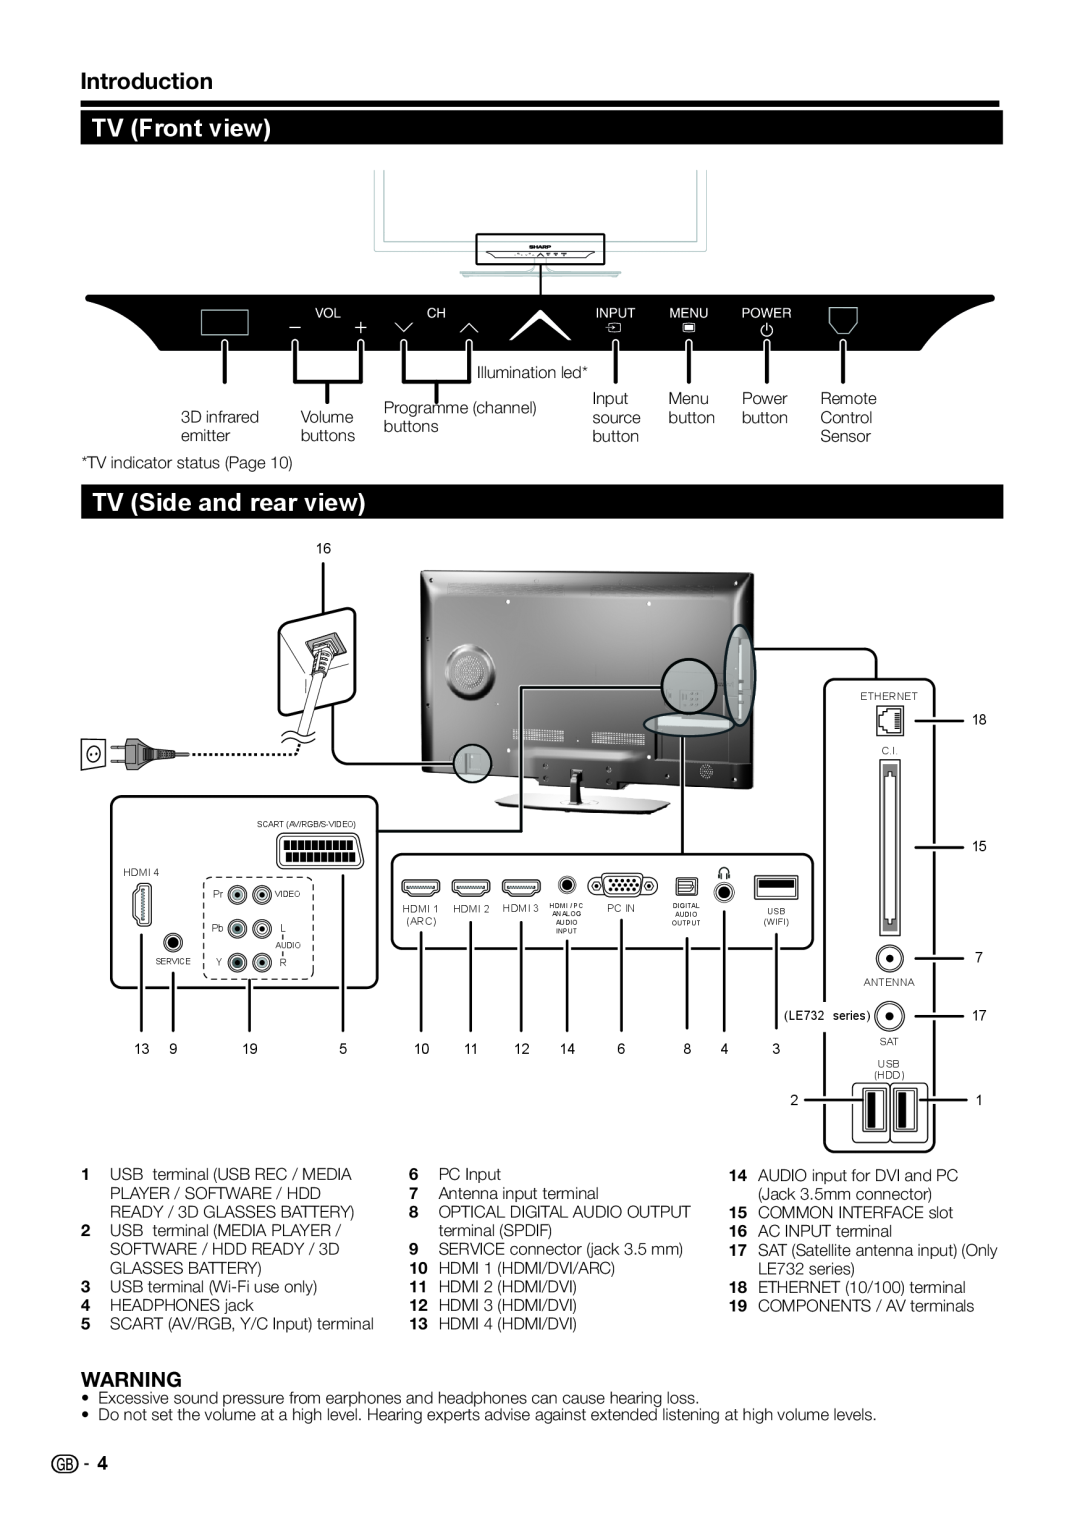 Sharp LC-40LE730E, LC-46LE732E TV Front view, TV Side and rear view, Introduction, Illumination led, Remote, Control 